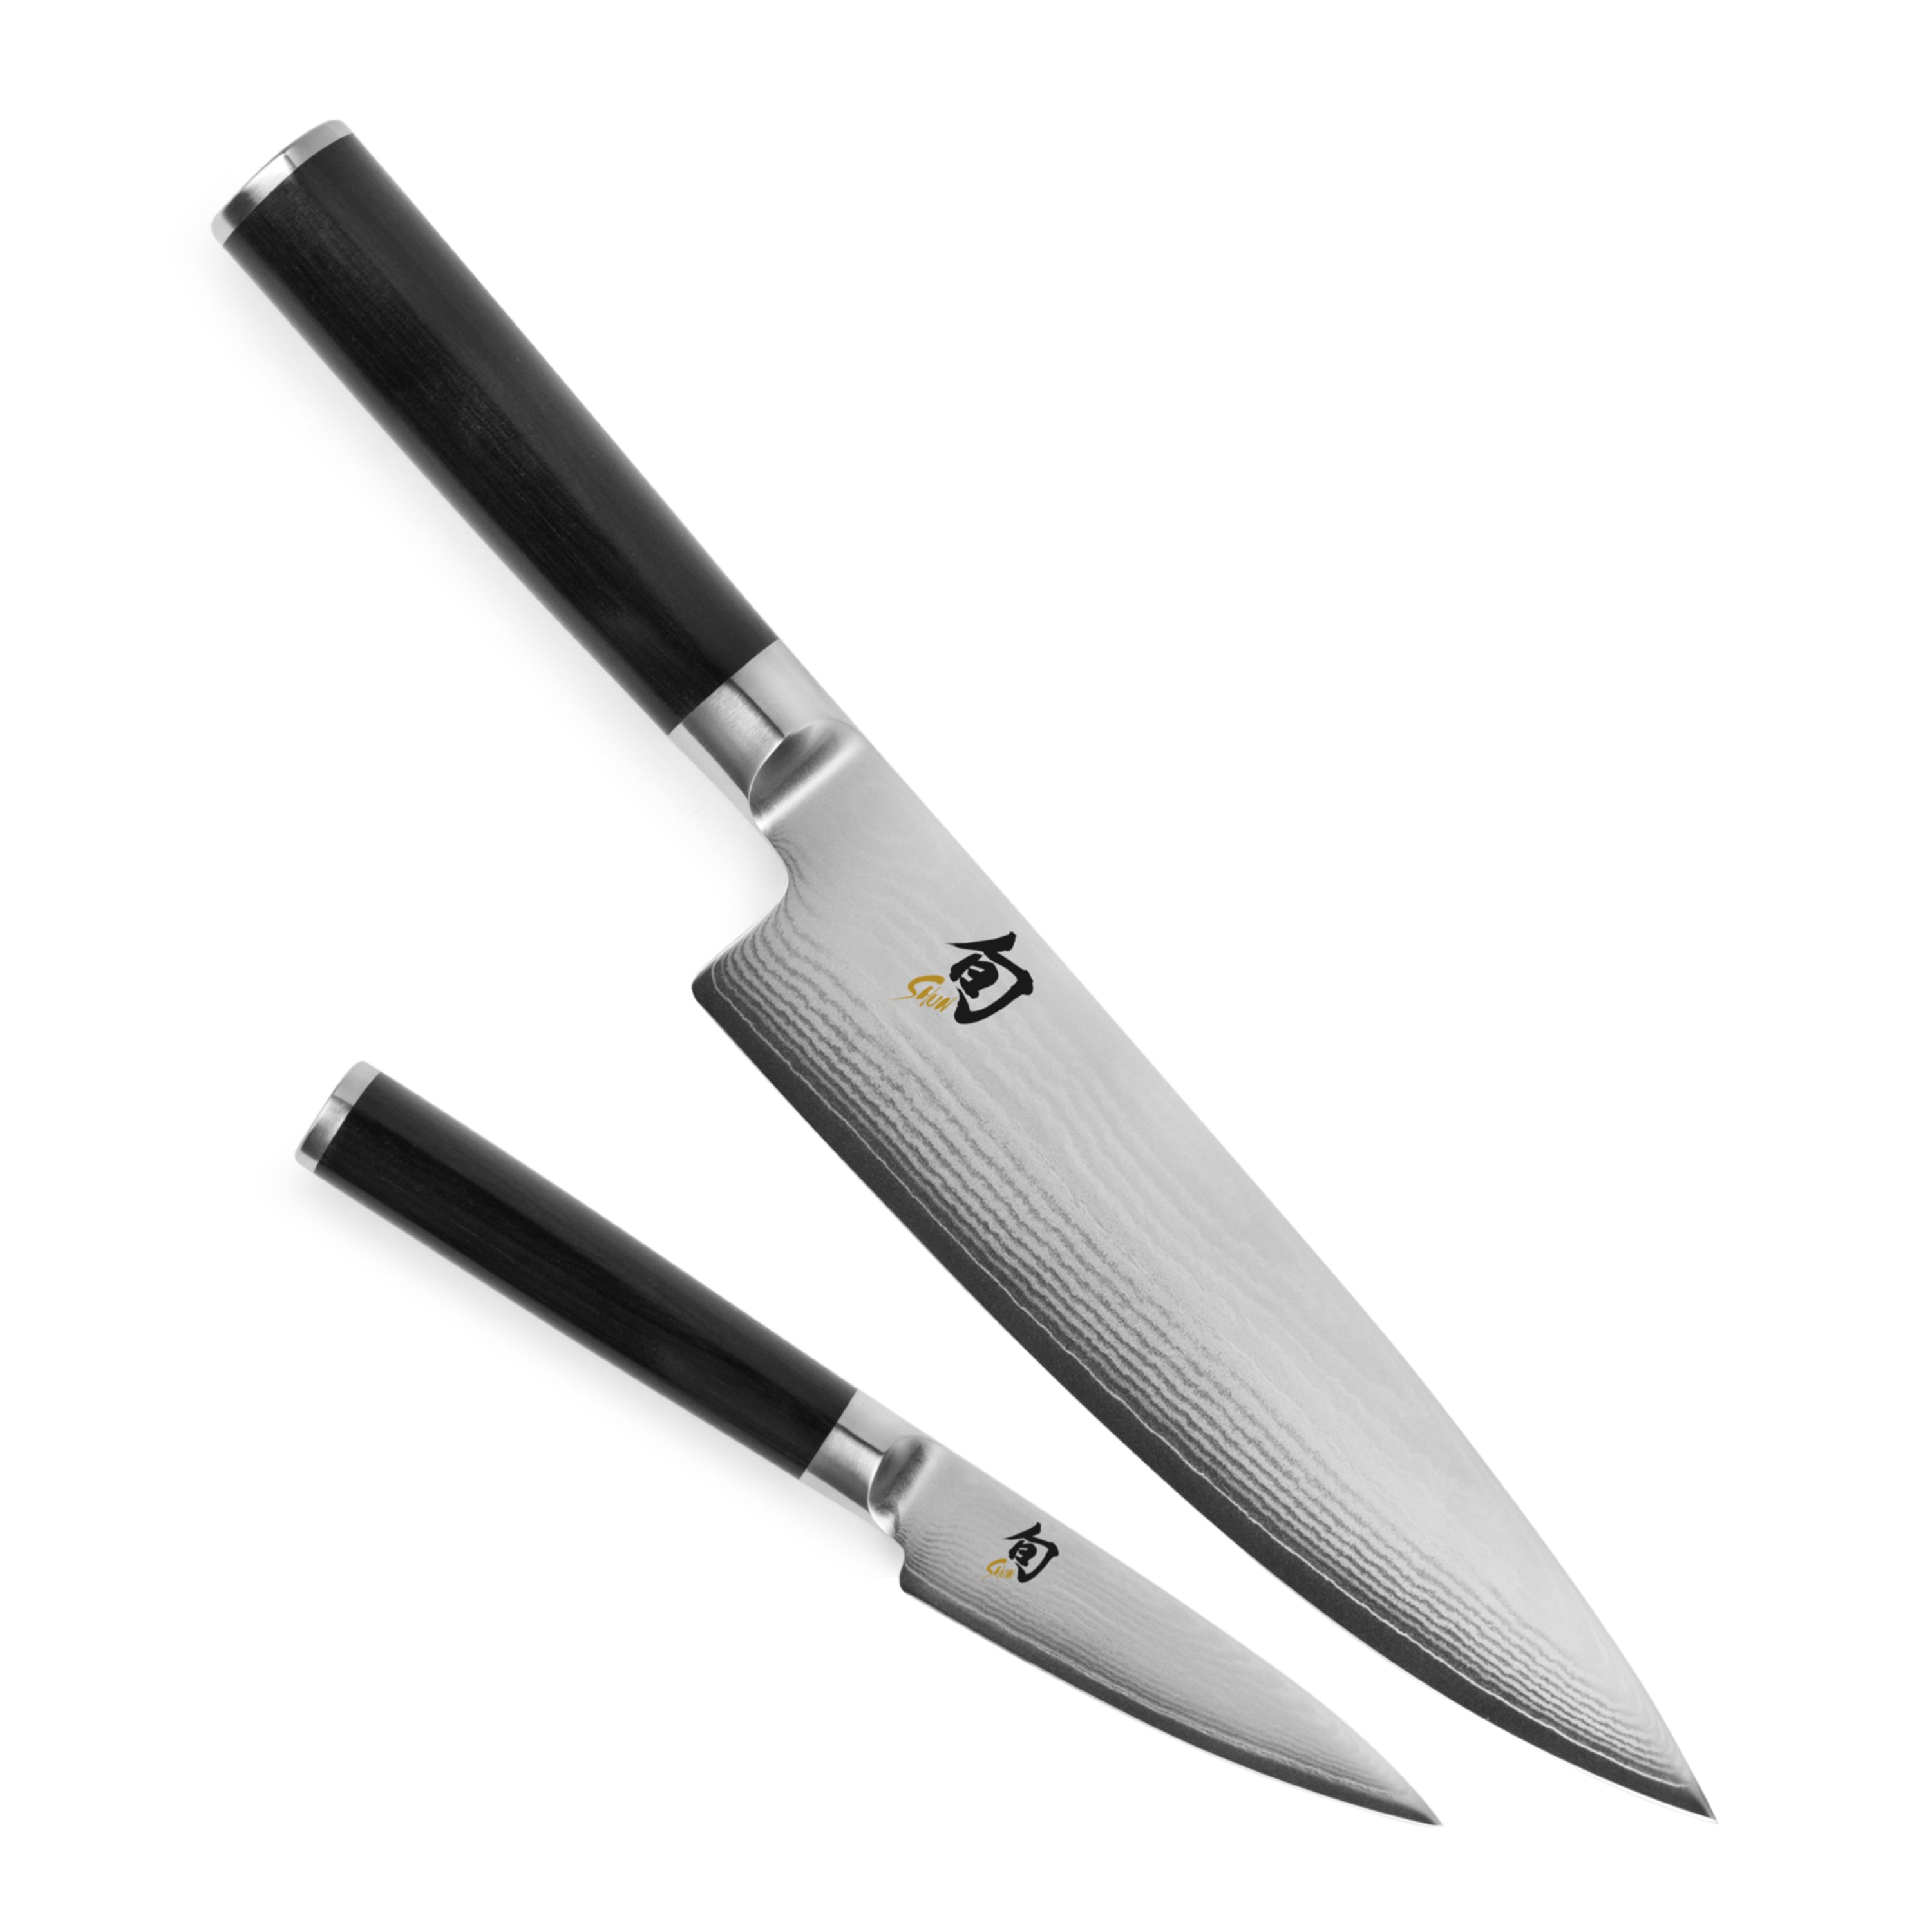 Chef Knife, Little Cook Ultra Sharp Kitchen Knife, German Stainless Steel  Chef Knife Set, Includes 8 inch Chef's Knife, 4 inch Paring Knife and 2